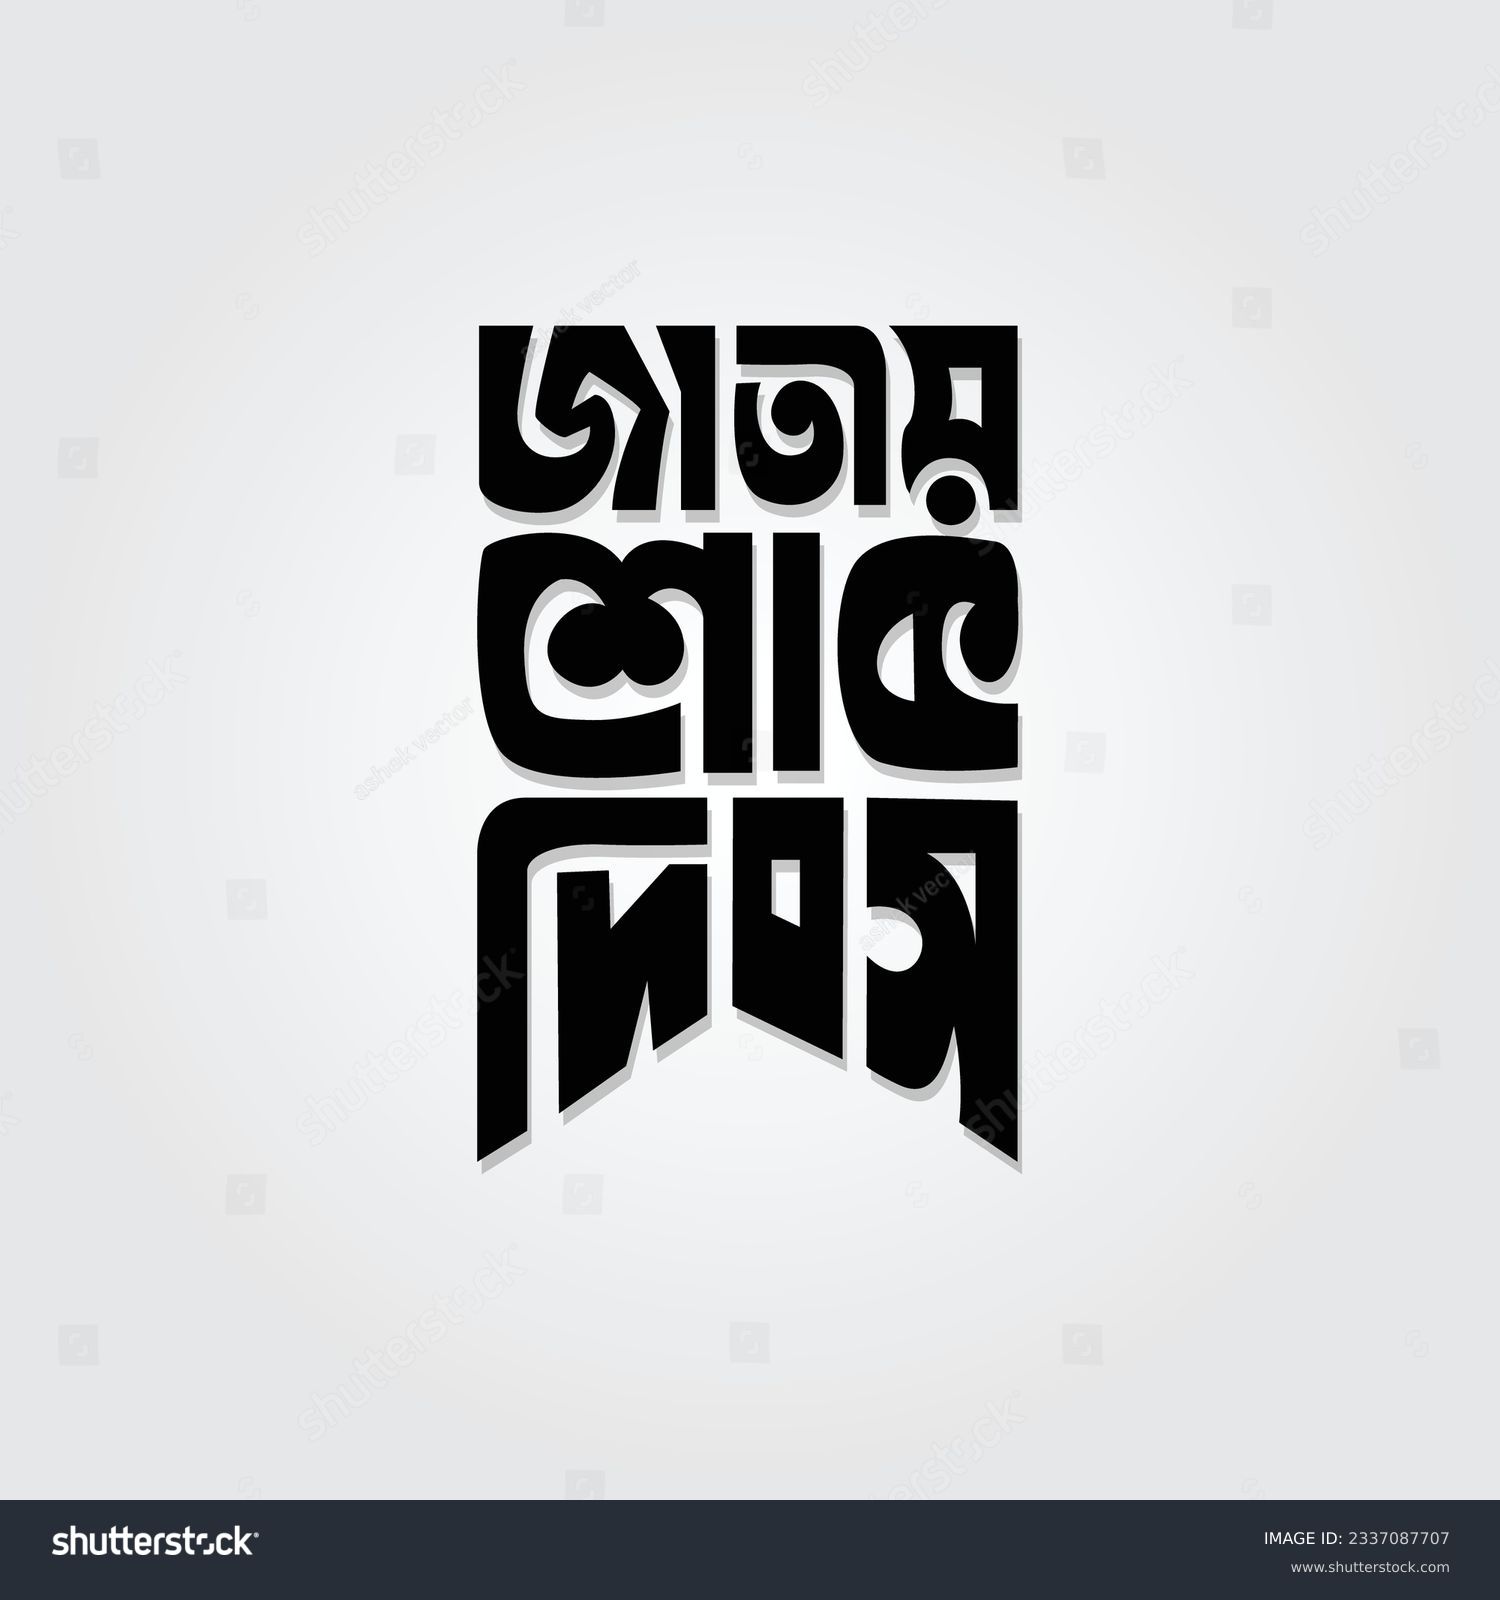 SVG of National Mourning Day bangla typography design to celebrate national holiday in Bangladesh in 15 August.  svg